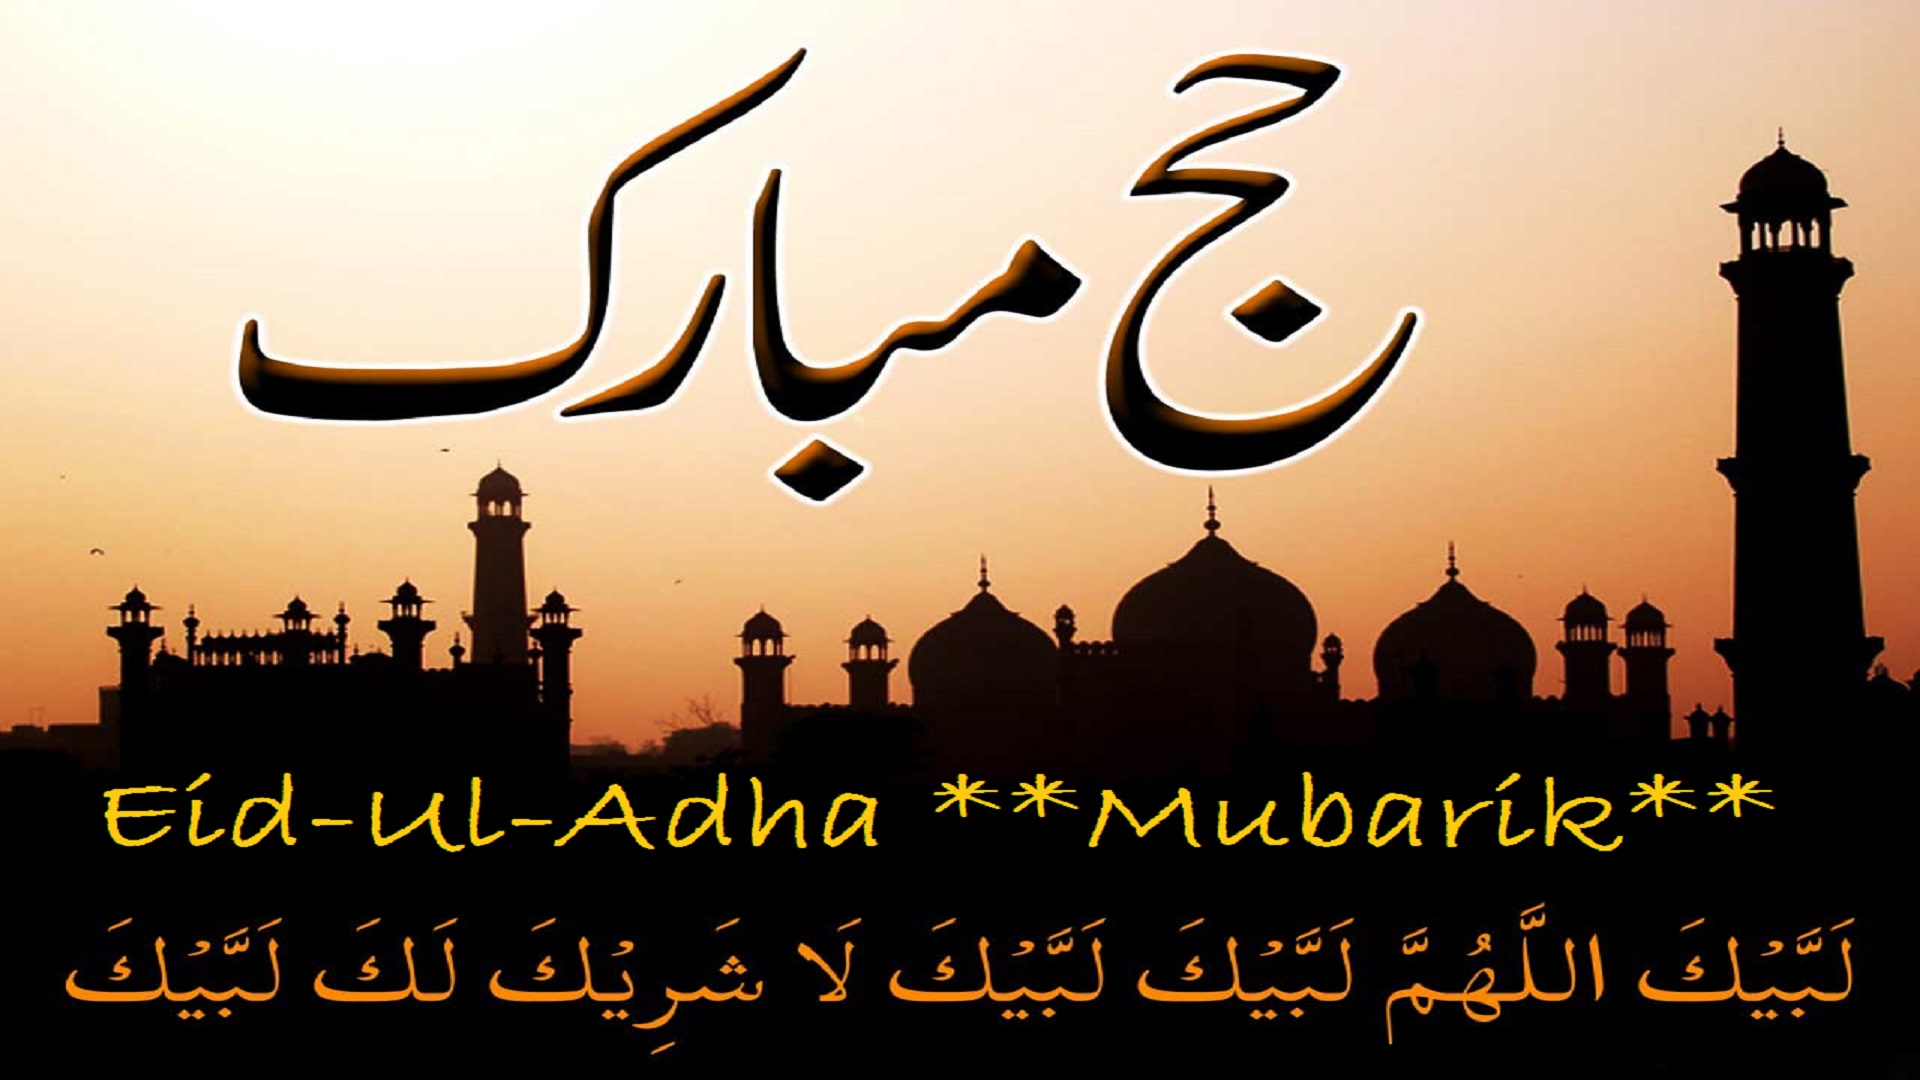 eid ul adha hd wallpapers,font,text,calligraphy,mosque,sky